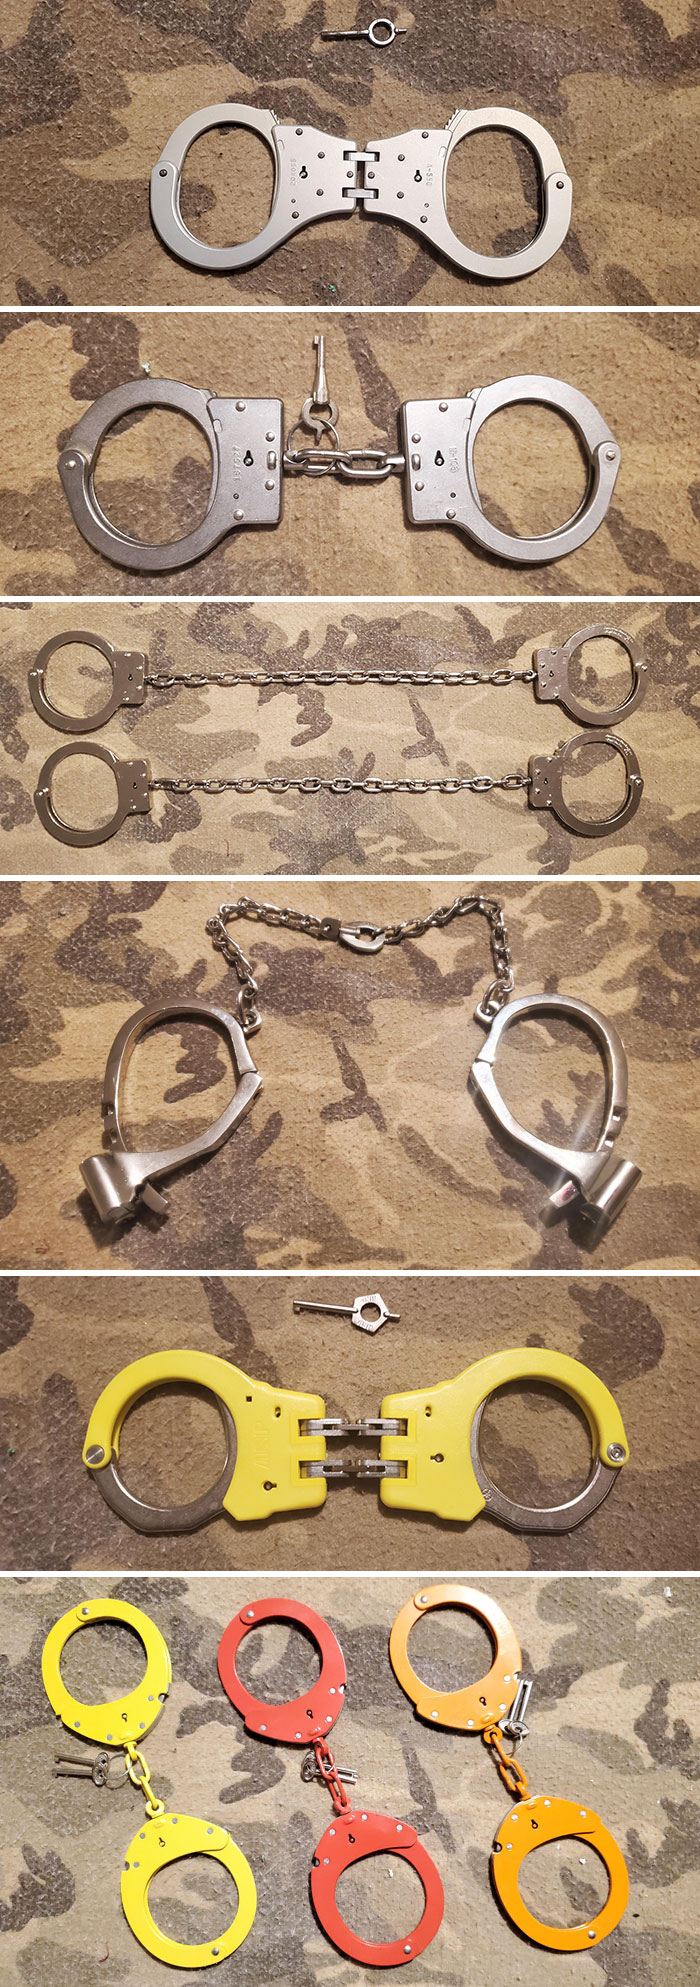 Some Of My Handcuff Collection